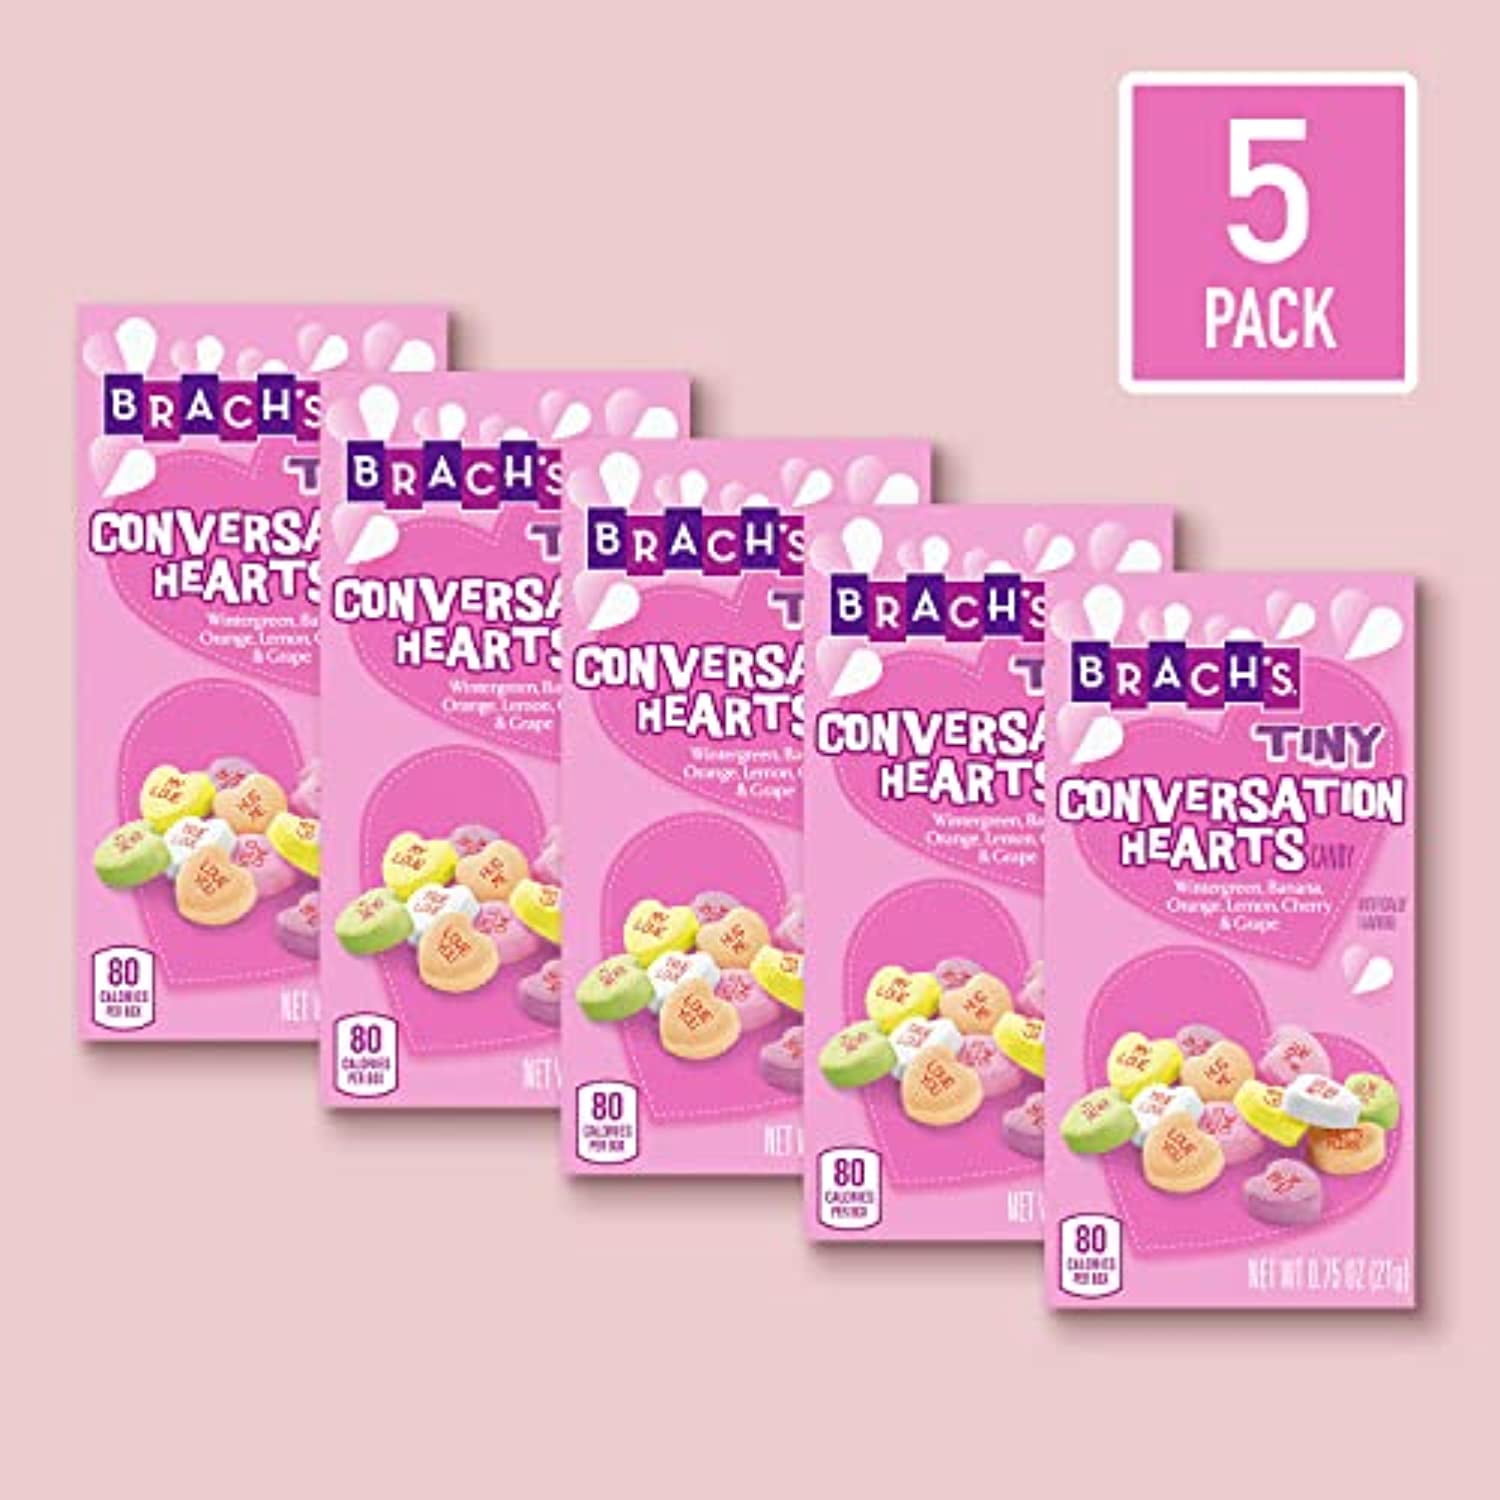 BrachS ValentineS Day Tiny Conversation Hearts Candy  Candy Gift Boxes  Individually Wrapped, Iconic Valentines Day Heart Candy, 0.75Oz (Pack Of 5)  